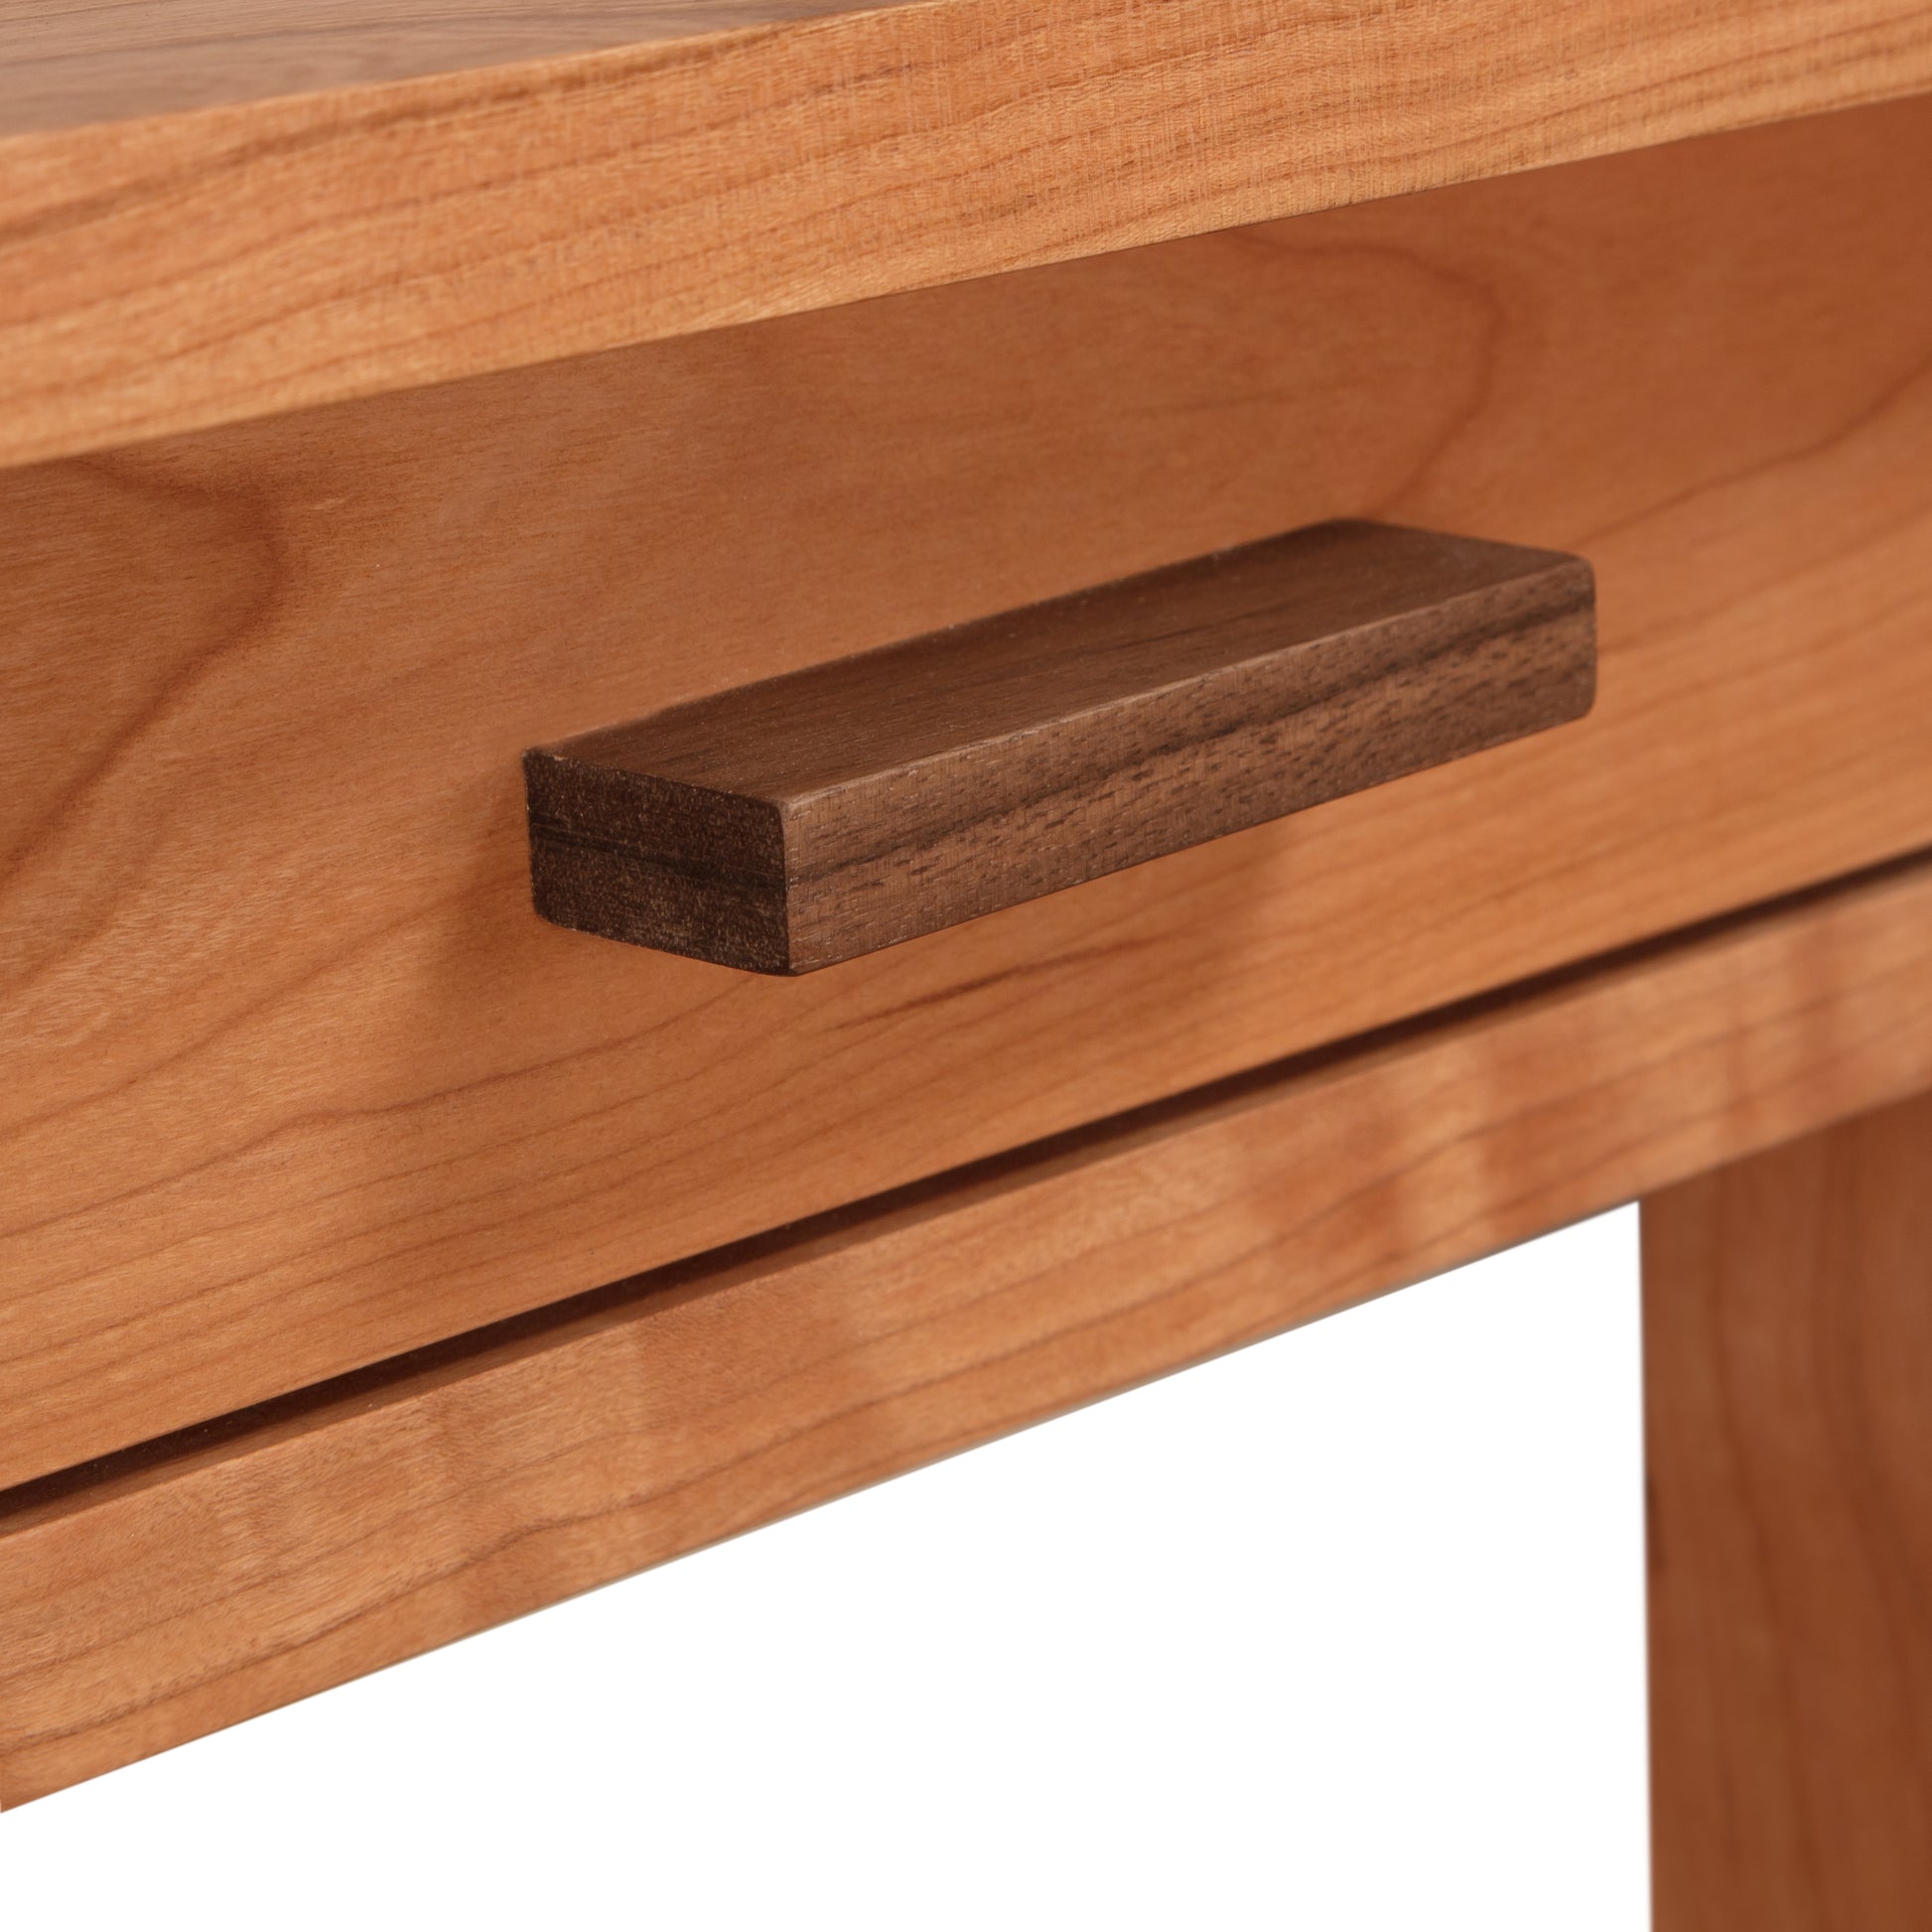 Close-up of a natural cherry wooden drawer with a simple rectangular pull handle, embodying Vermont Furniture Designs' Modern Craftsman Nightstand aesthetics.